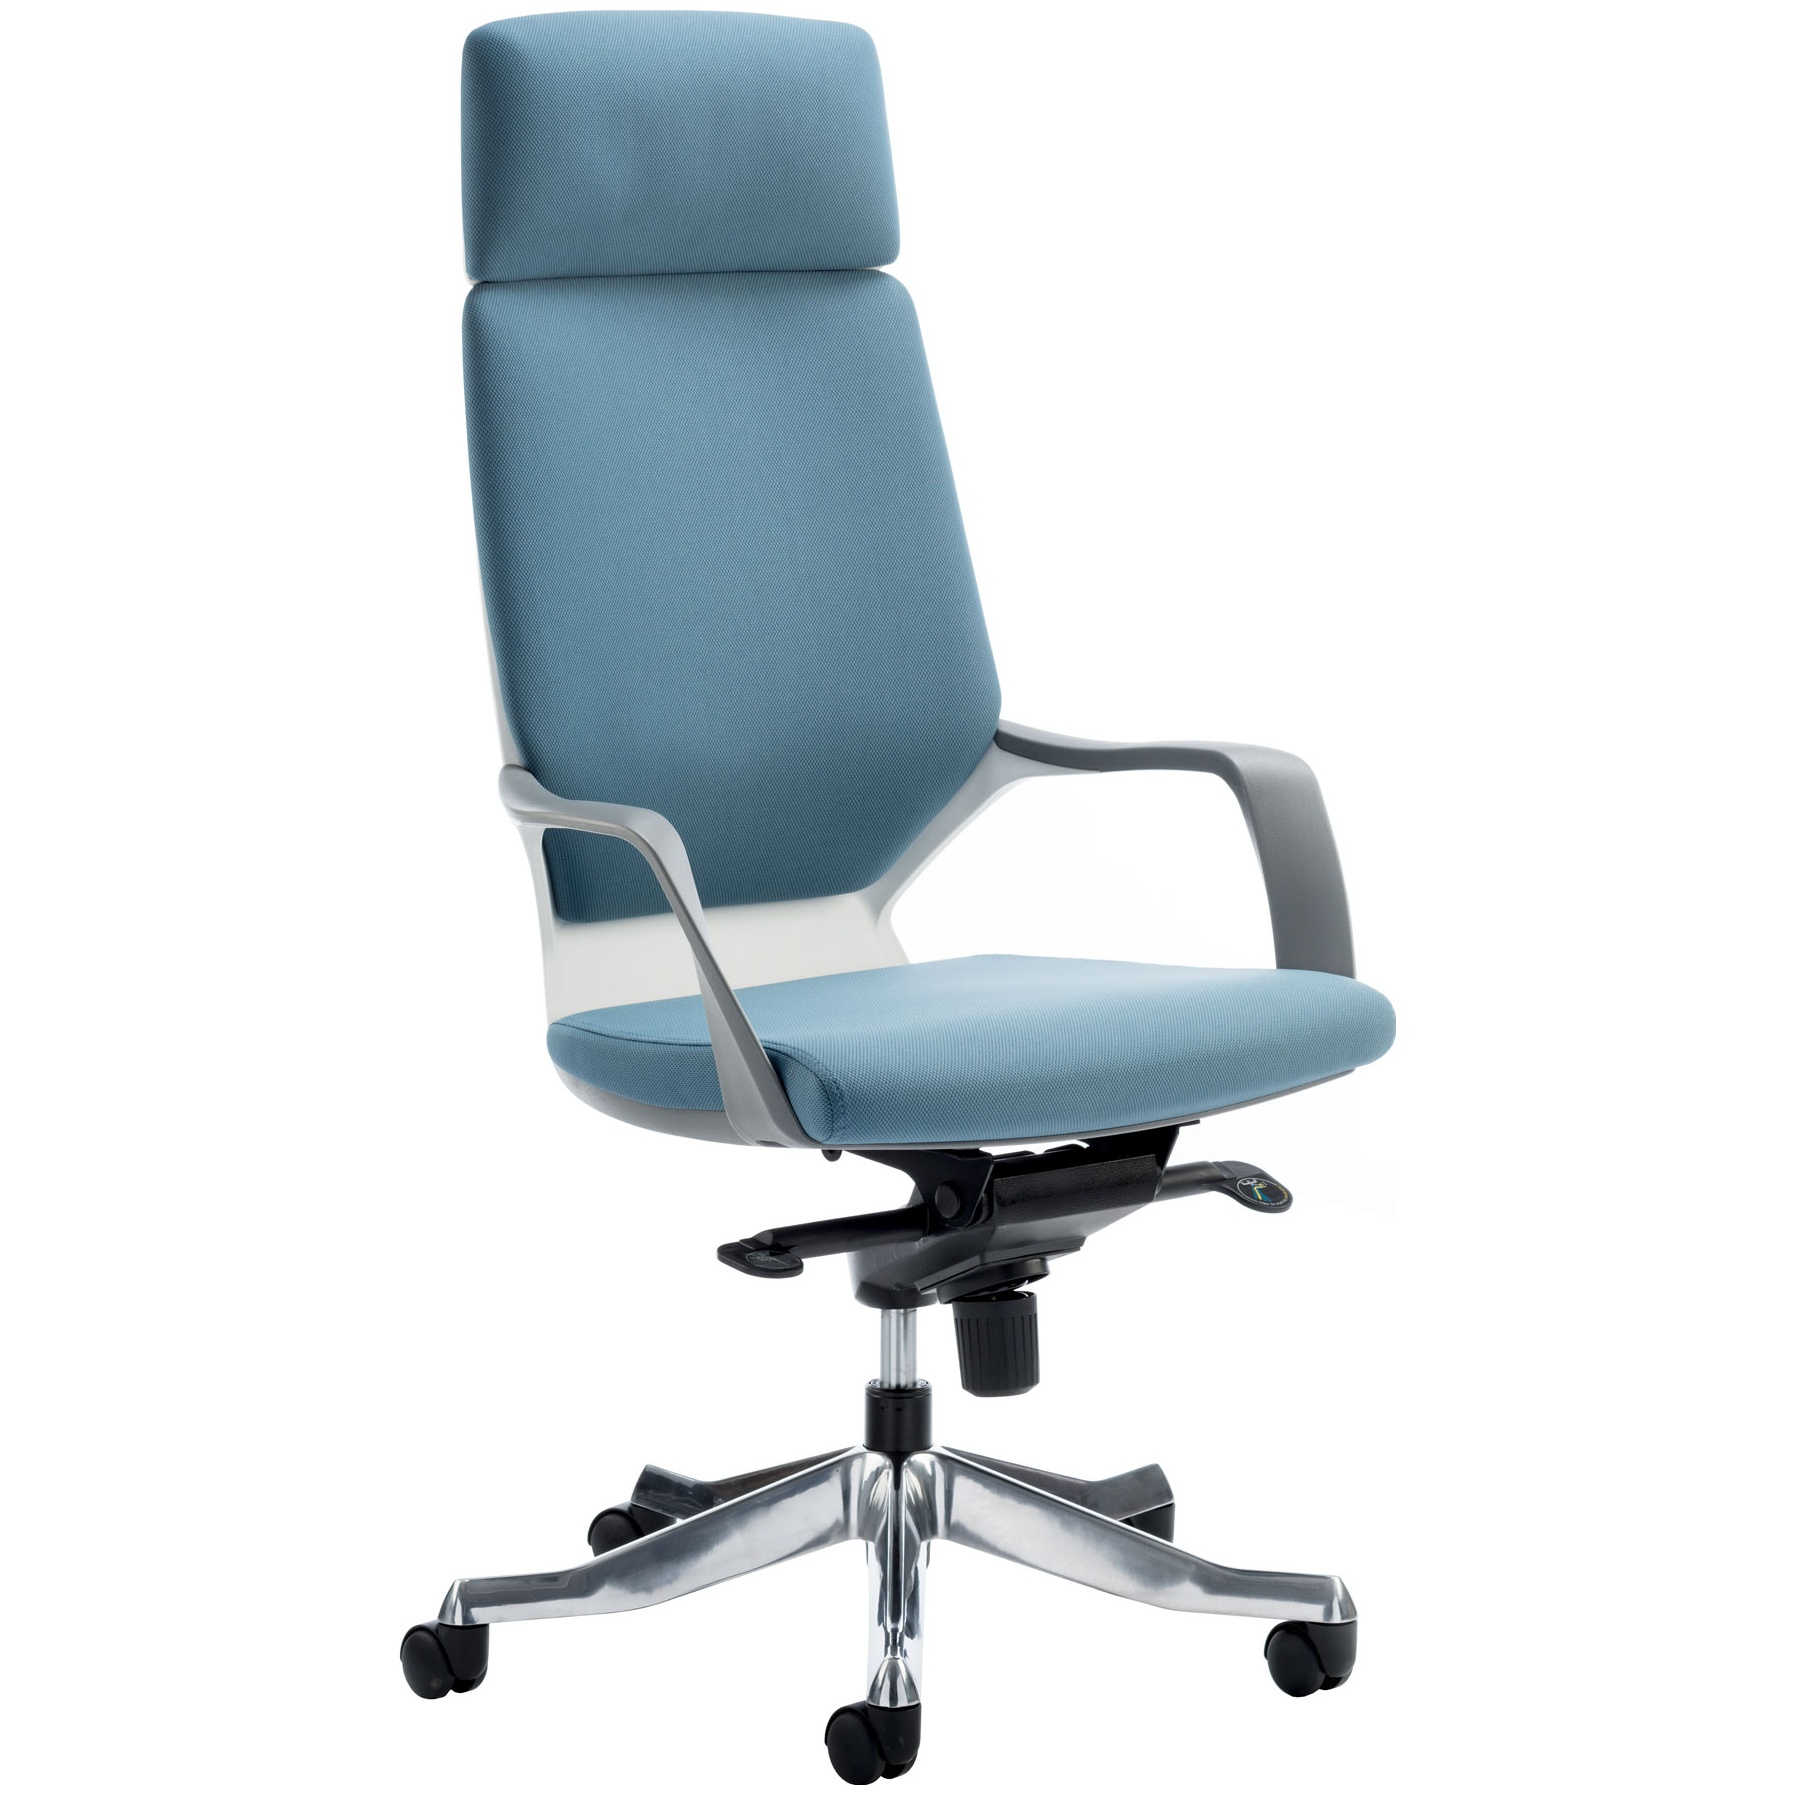 Best Office Chair For Neck Pain Uk - 7 best ergonomic office chairs to